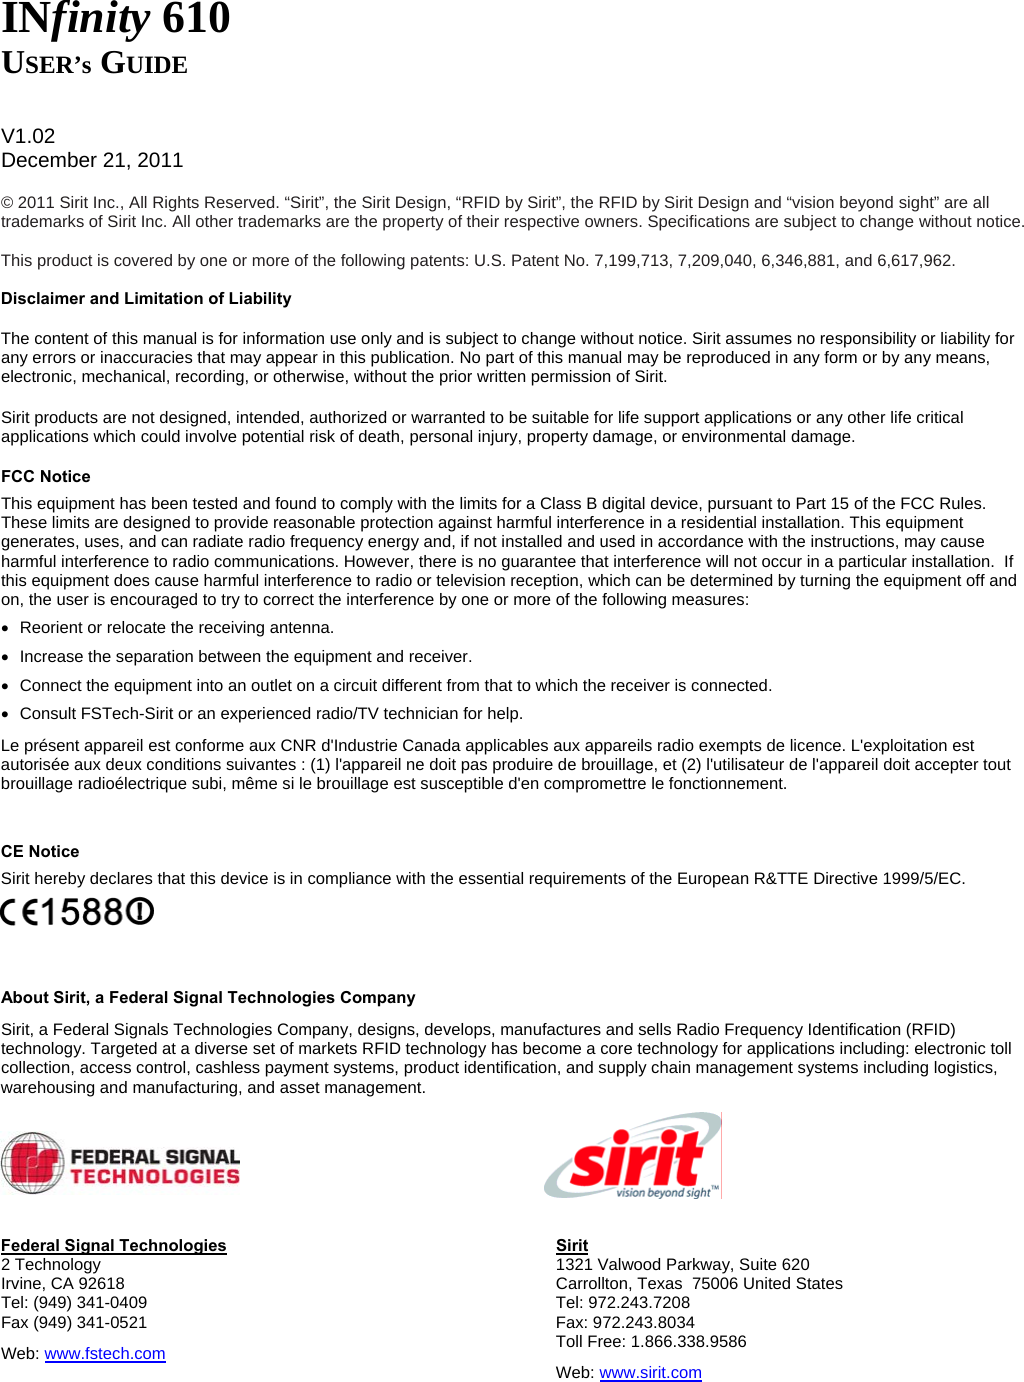   INfinity 610 USER’s GUIDE   V1.02 December 21, 2011  © 2011 Sirit Inc., All Rights Reserved. “Sirit”, the Sirit Design, “RFID by Sirit”, the RFID by Sirit Design and “vision beyond sight” are all trademarks of Sirit Inc. All other trademarks are the property of their respective owners. Specifications are subject to change without notice.  This product is covered by one or more of the following patents: U.S. Patent No. 7,199,713, 7,209,040, 6,346,881, and 6,617,962.  Disclaimer and Limitation of Liability The content of this manual is for information use only and is subject to change without notice. Sirit assumes no responsibility or liability for any errors or inaccuracies that may appear in this publication. No part of this manual may be reproduced in any form or by any means, electronic, mechanical, recording, or otherwise, without the prior written permission of Sirit. Sirit products are not designed, intended, authorized or warranted to be suitable for life support applications or any other life critical applications which could involve potential risk of death, personal injury, property damage, or environmental damage. FCC Notice This equipment has been tested and found to comply with the limits for a Class B digital device, pursuant to Part 15 of the FCC Rules. These limits are designed to provide reasonable protection against harmful interference in a residential installation. This equipment generates, uses, and can radiate radio frequency energy and, if not installed and used in accordance with the instructions, may cause harmful interference to radio communications. However, there is no guarantee that interference will not occur in a particular installation.  If this equipment does cause harmful interference to radio or television reception, which can be determined by turning the equipment off and on, the user is encouraged to try to correct the interference by one or more of the following measures: •  Reorient or relocate the receiving antenna. •  Increase the separation between the equipment and receiver. •  Connect the equipment into an outlet on a circuit different from that to which the receiver is connected. •  Consult FSTech-Sirit or an experienced radio/TV technician for help. Le présent appareil est conforme aux CNR d&apos;Industrie Canada applicables aux appareils radio exempts de licence. L&apos;exploitation est autorisée aux deux conditions suivantes : (1) l&apos;appareil ne doit pas produire de brouillage, et (2) l&apos;utilisateur de l&apos;appareil doit accepter tout brouillage radioélectrique subi, même si le brouillage est susceptible d&apos;en compromettre le fonctionnement.  CE Notice Sirit hereby declares that this device is in compliance with the essential requirements of the European R&amp;TTE Directive 1999/5/EC.   About Sirit, a Federal Signal Technologies Company Sirit, a Federal Signals Technologies Company, designs, develops, manufactures and sells Radio Frequency Identification (RFID) technology. Targeted at a diverse set of markets RFID technology has become a core technology for applications including: electronic toll collection, access control, cashless payment systems, product identification, and supply chain management systems including logistics, warehousing and manufacturing, and asset management.     Federal Signal Technologies 2 Technology Irvine, CA 92618 Tel: (949) 341-0409 Fax (949) 341-0521 Web: www.fstech.com Sirit 1321 Valwood Parkway, Suite 620  Carrollton, Texas  75006 United States Tel: 972.243.7208 Fax: 972.243.8034 Toll Free: 1.866.338.9586 Web: www.sirit.com   